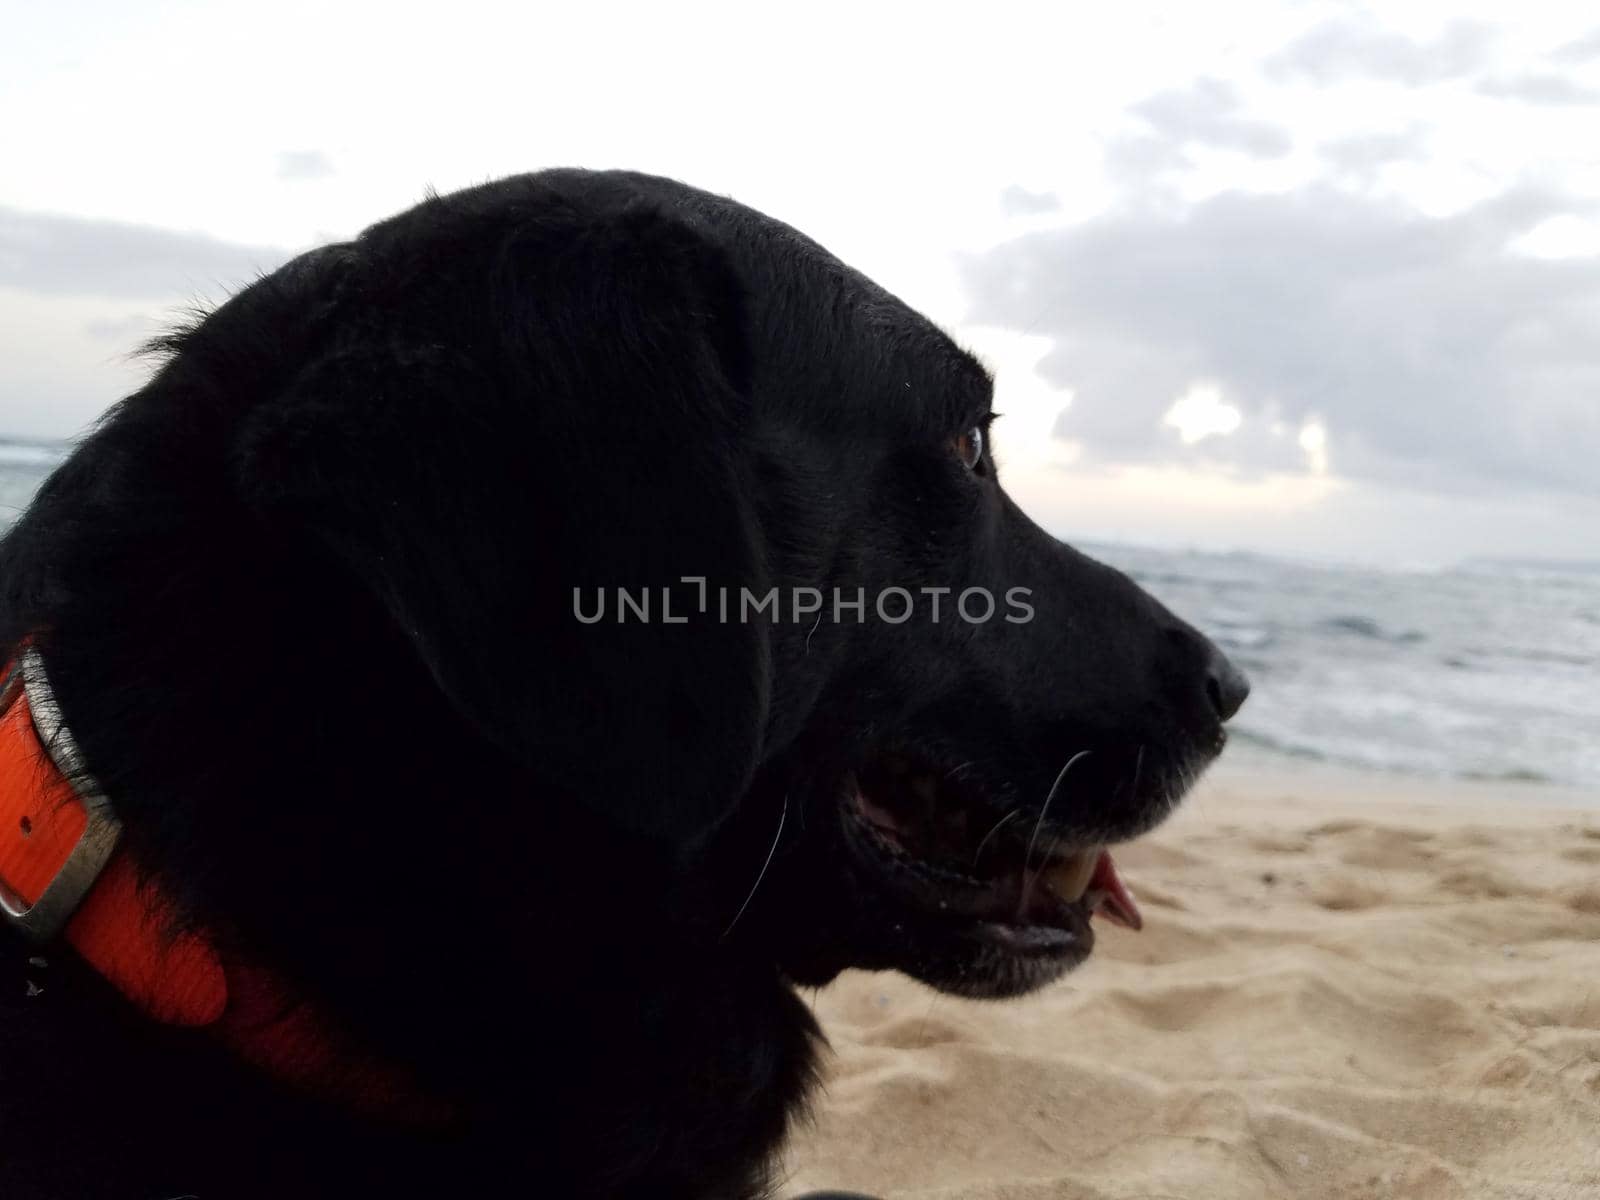 Black retriever Dog wearing a orange light on neck and tongue hanging out at dusk with view of Pacific ocean off coast of Oahu, Hawaii.